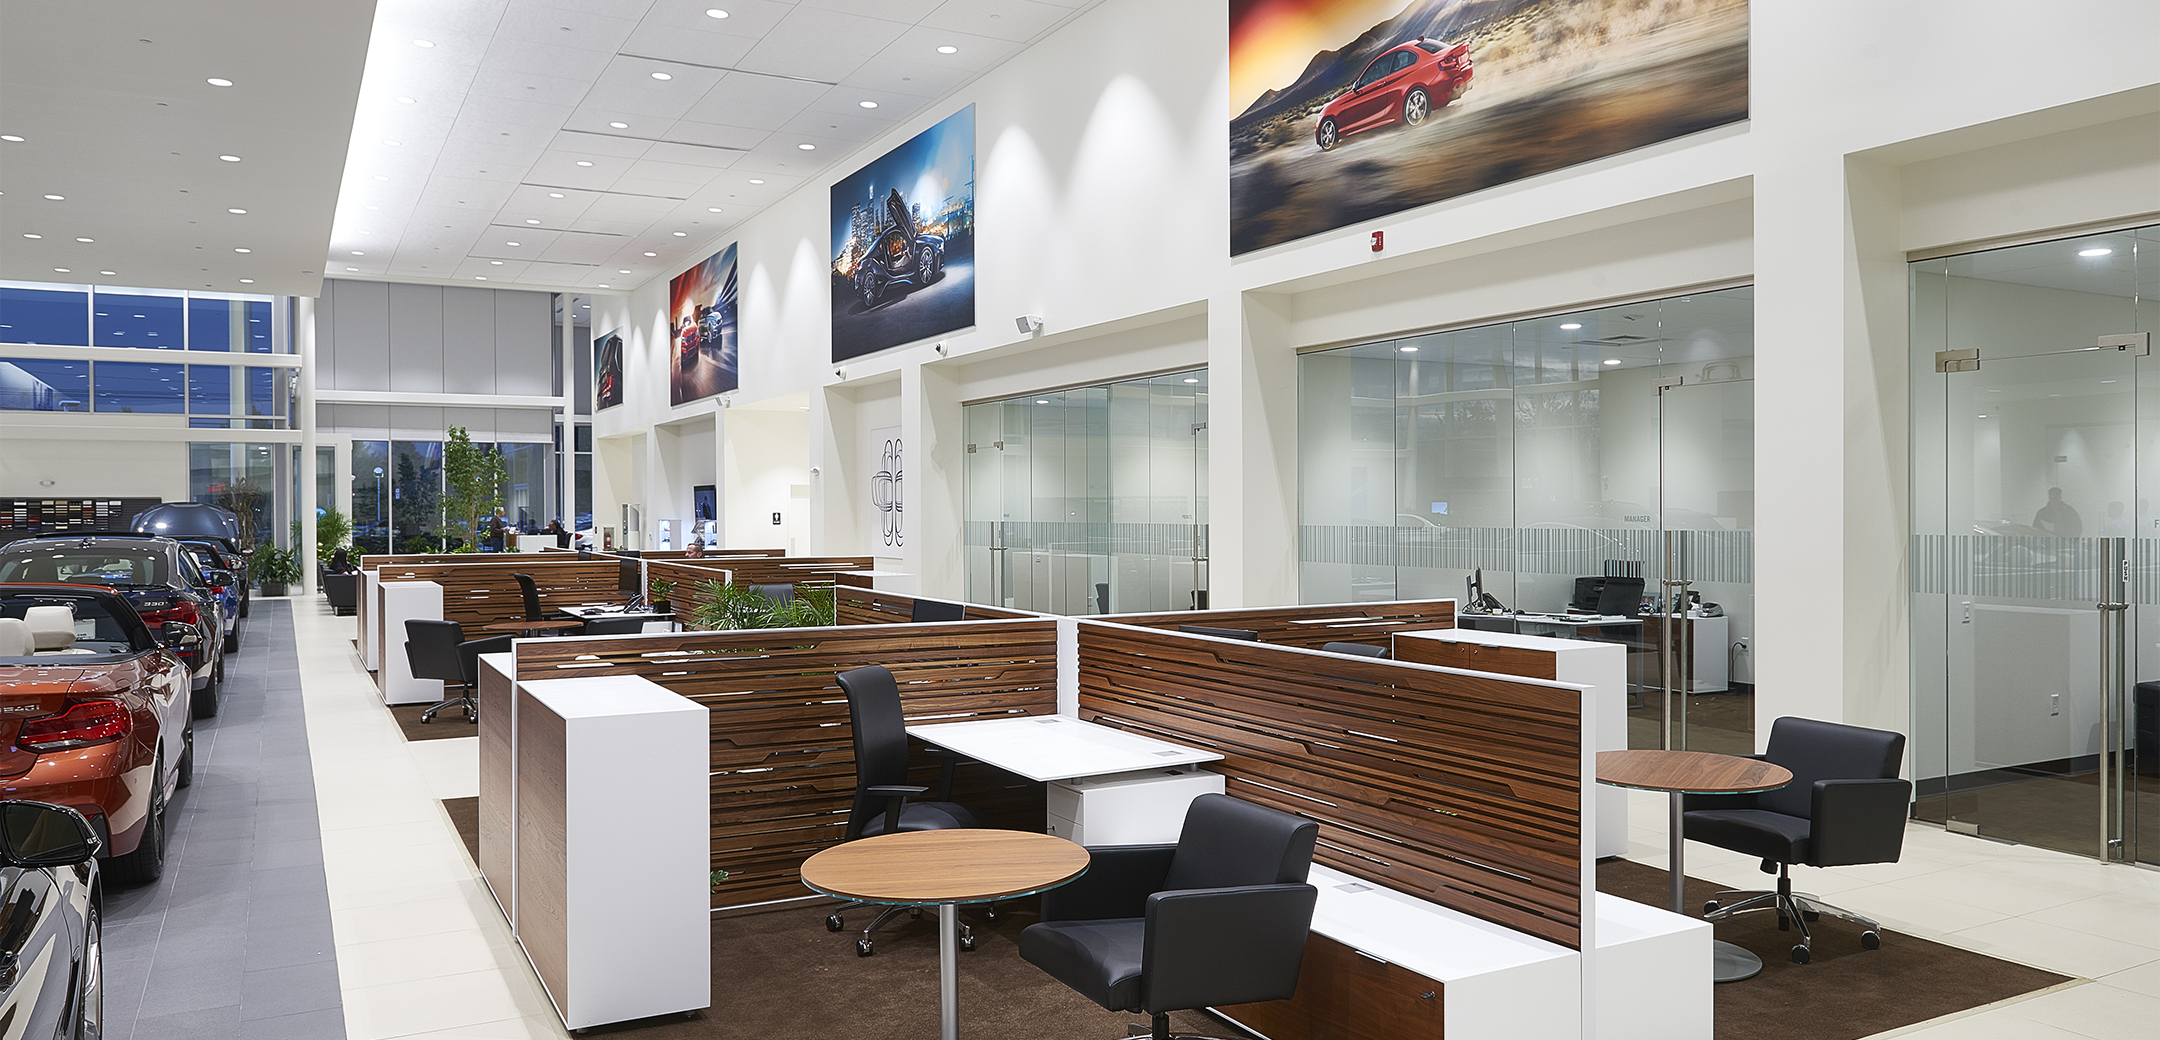 An interior view of the Ottos BMW sales floor area showcasing the glass window cubicles, wooden accented customer cubicles and cars lined along the side.